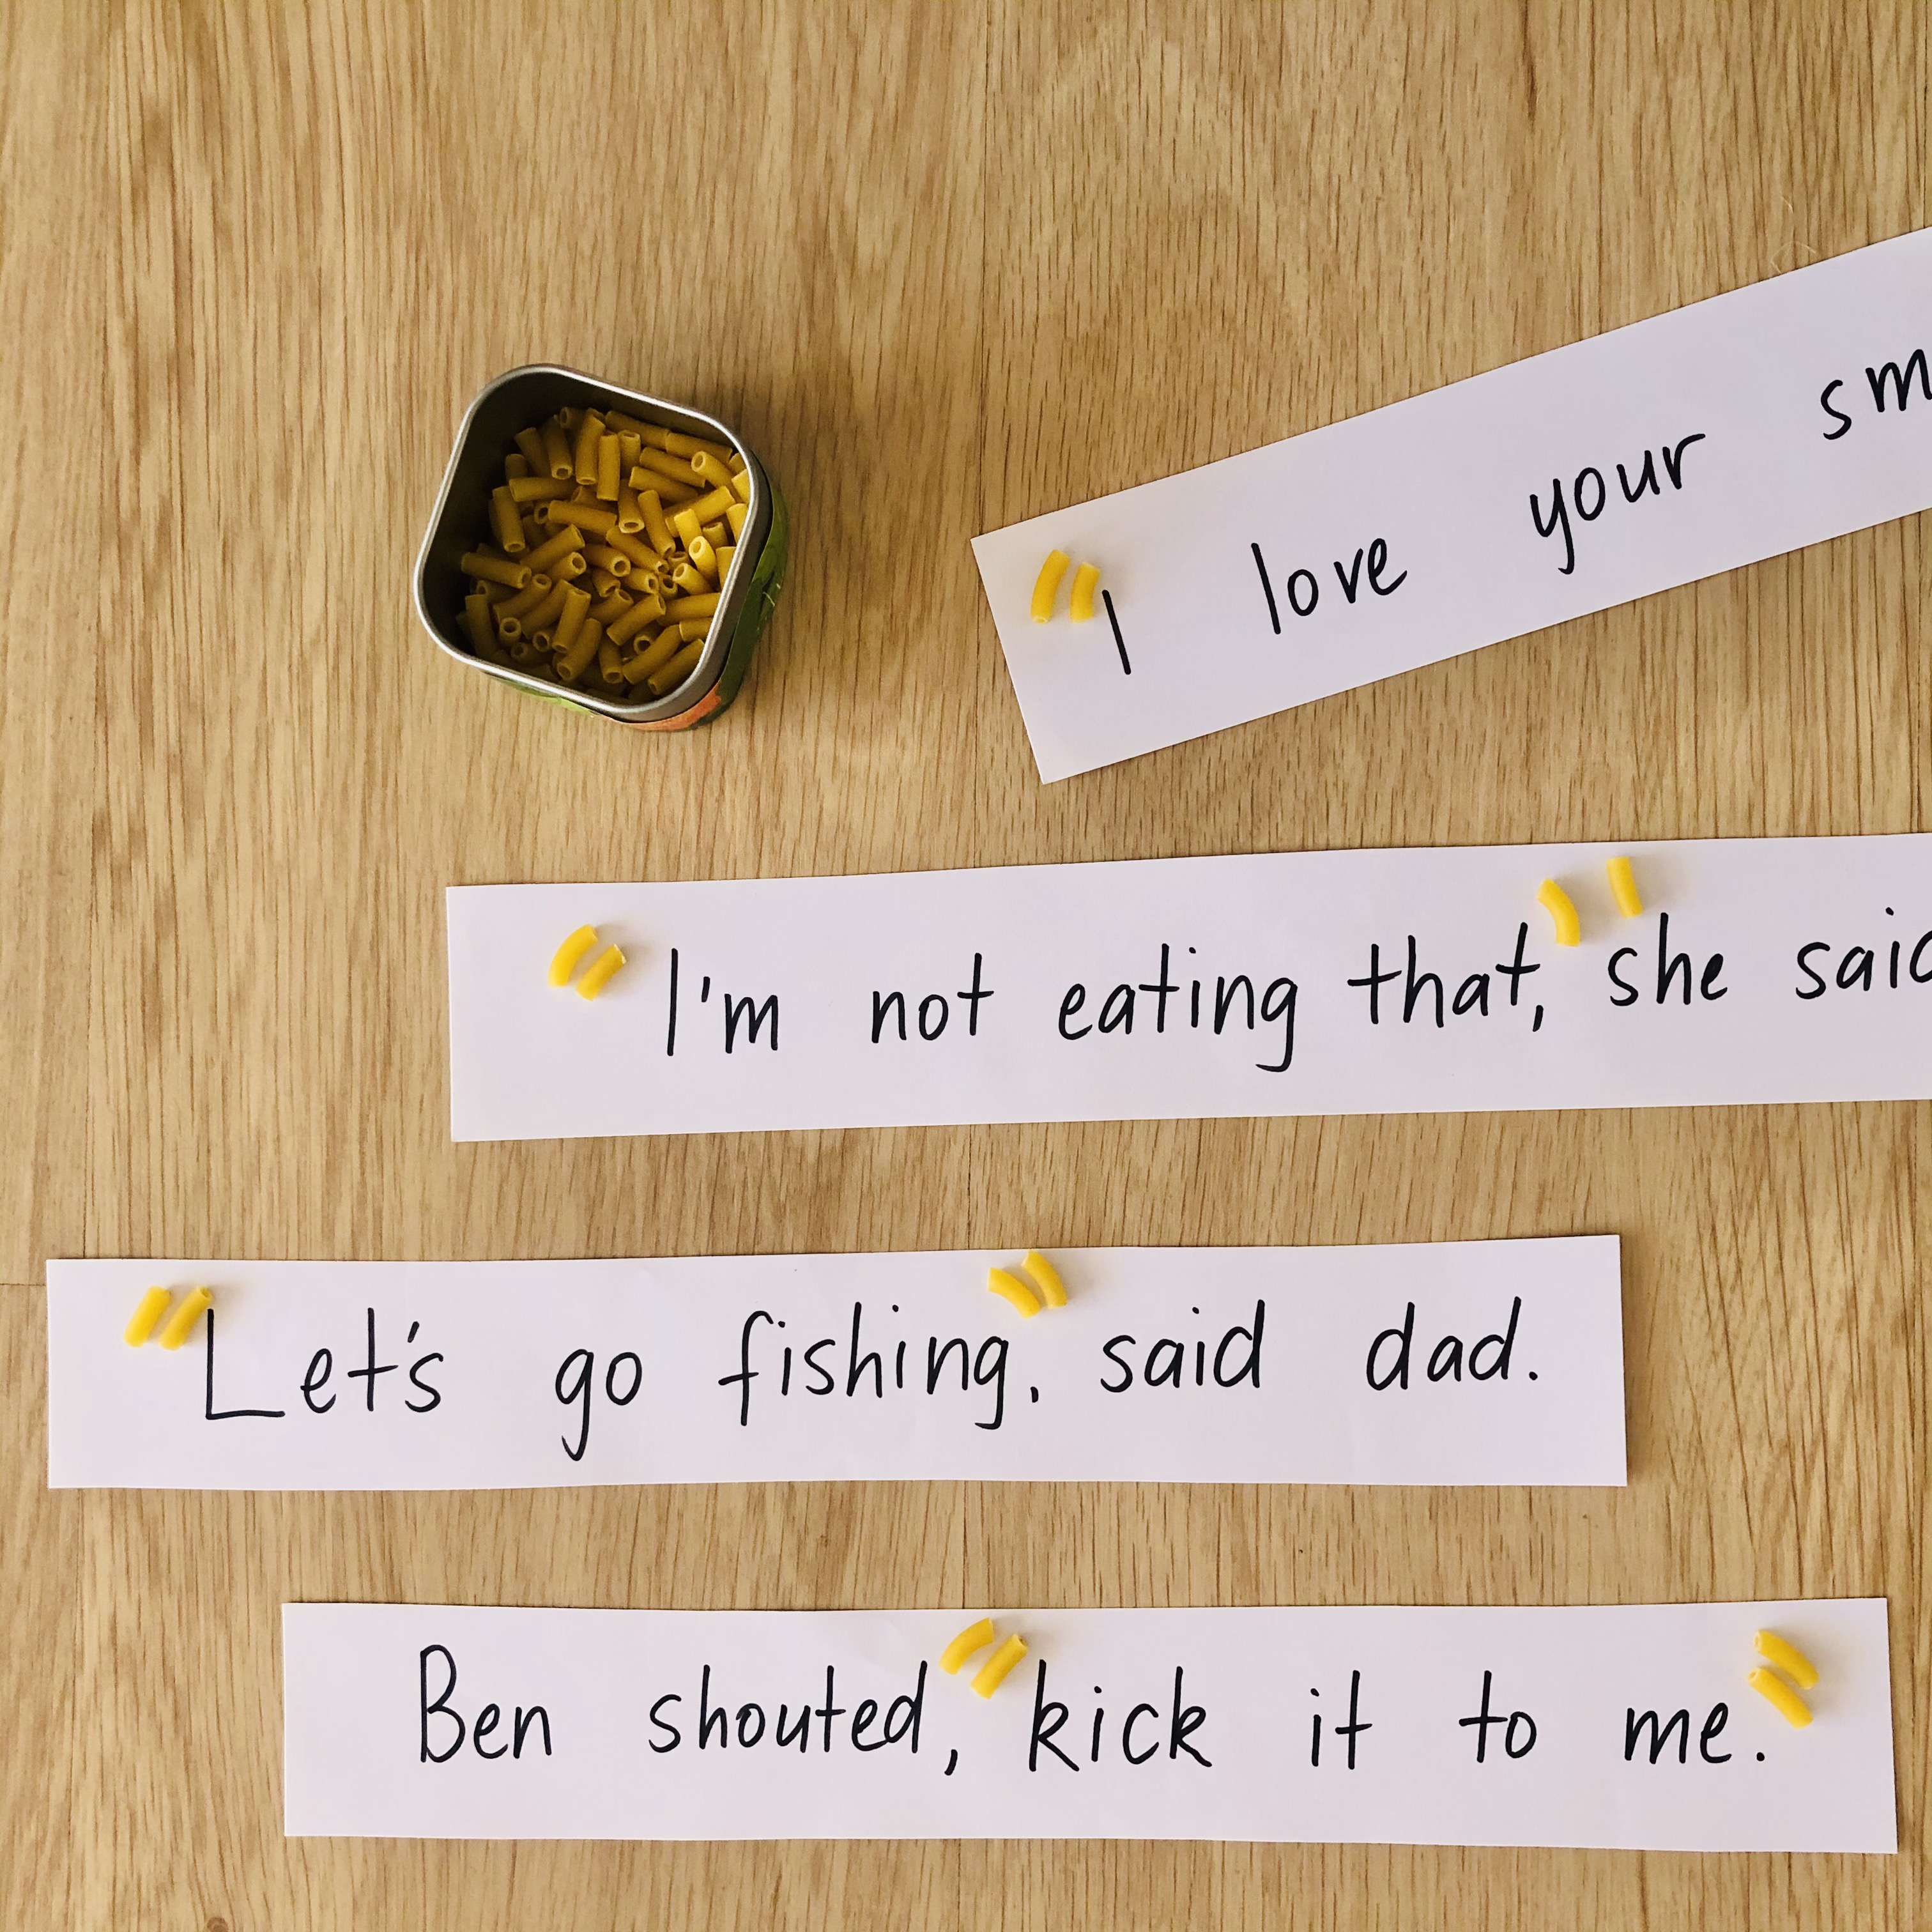 A fun punctuation lesson focused on the use of speech marks. Here we have sentence strips that have not been punctuated correctly. Students have used dry macaroni to show where the speech marks should be.